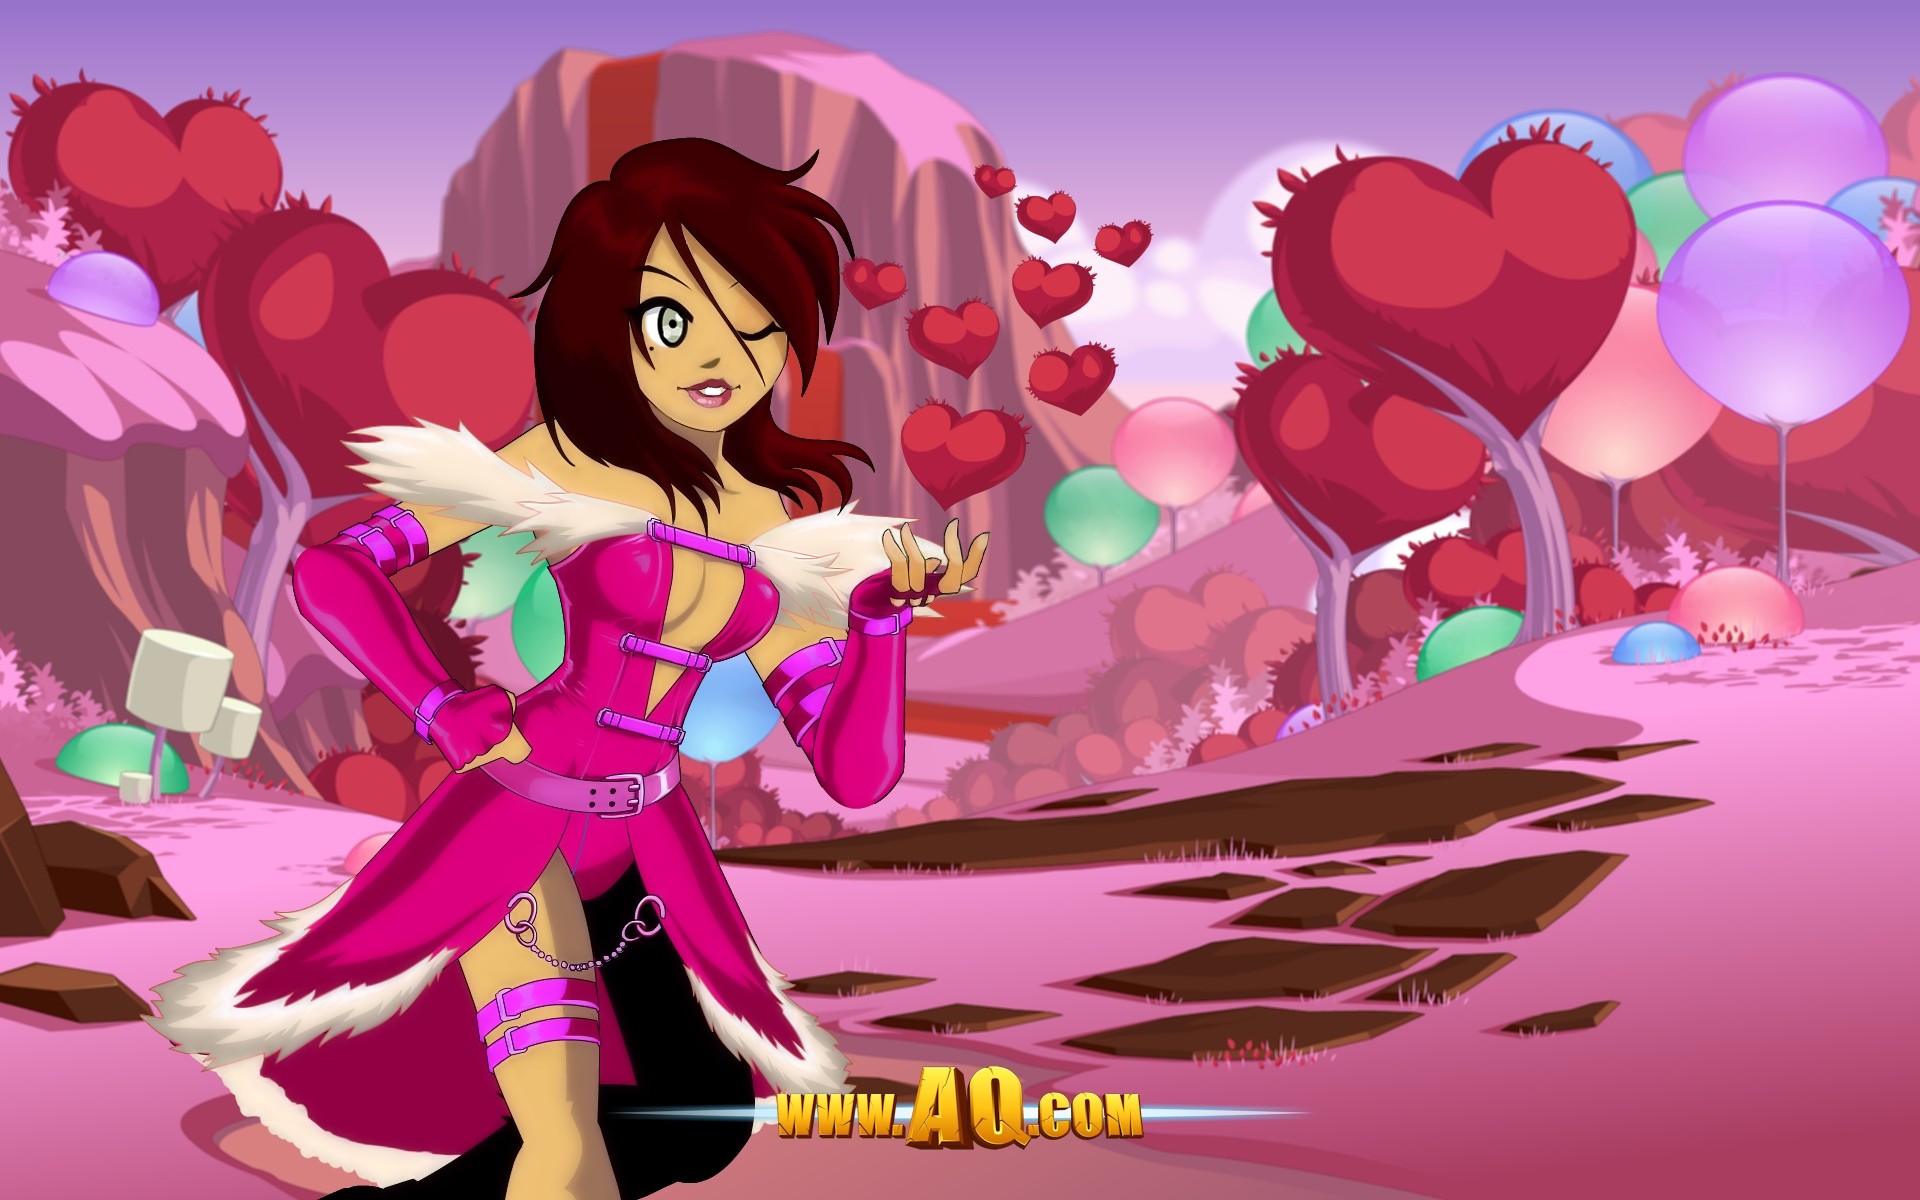 Beleen Valentines Day Wallpaper 1 Click the pic for the full size